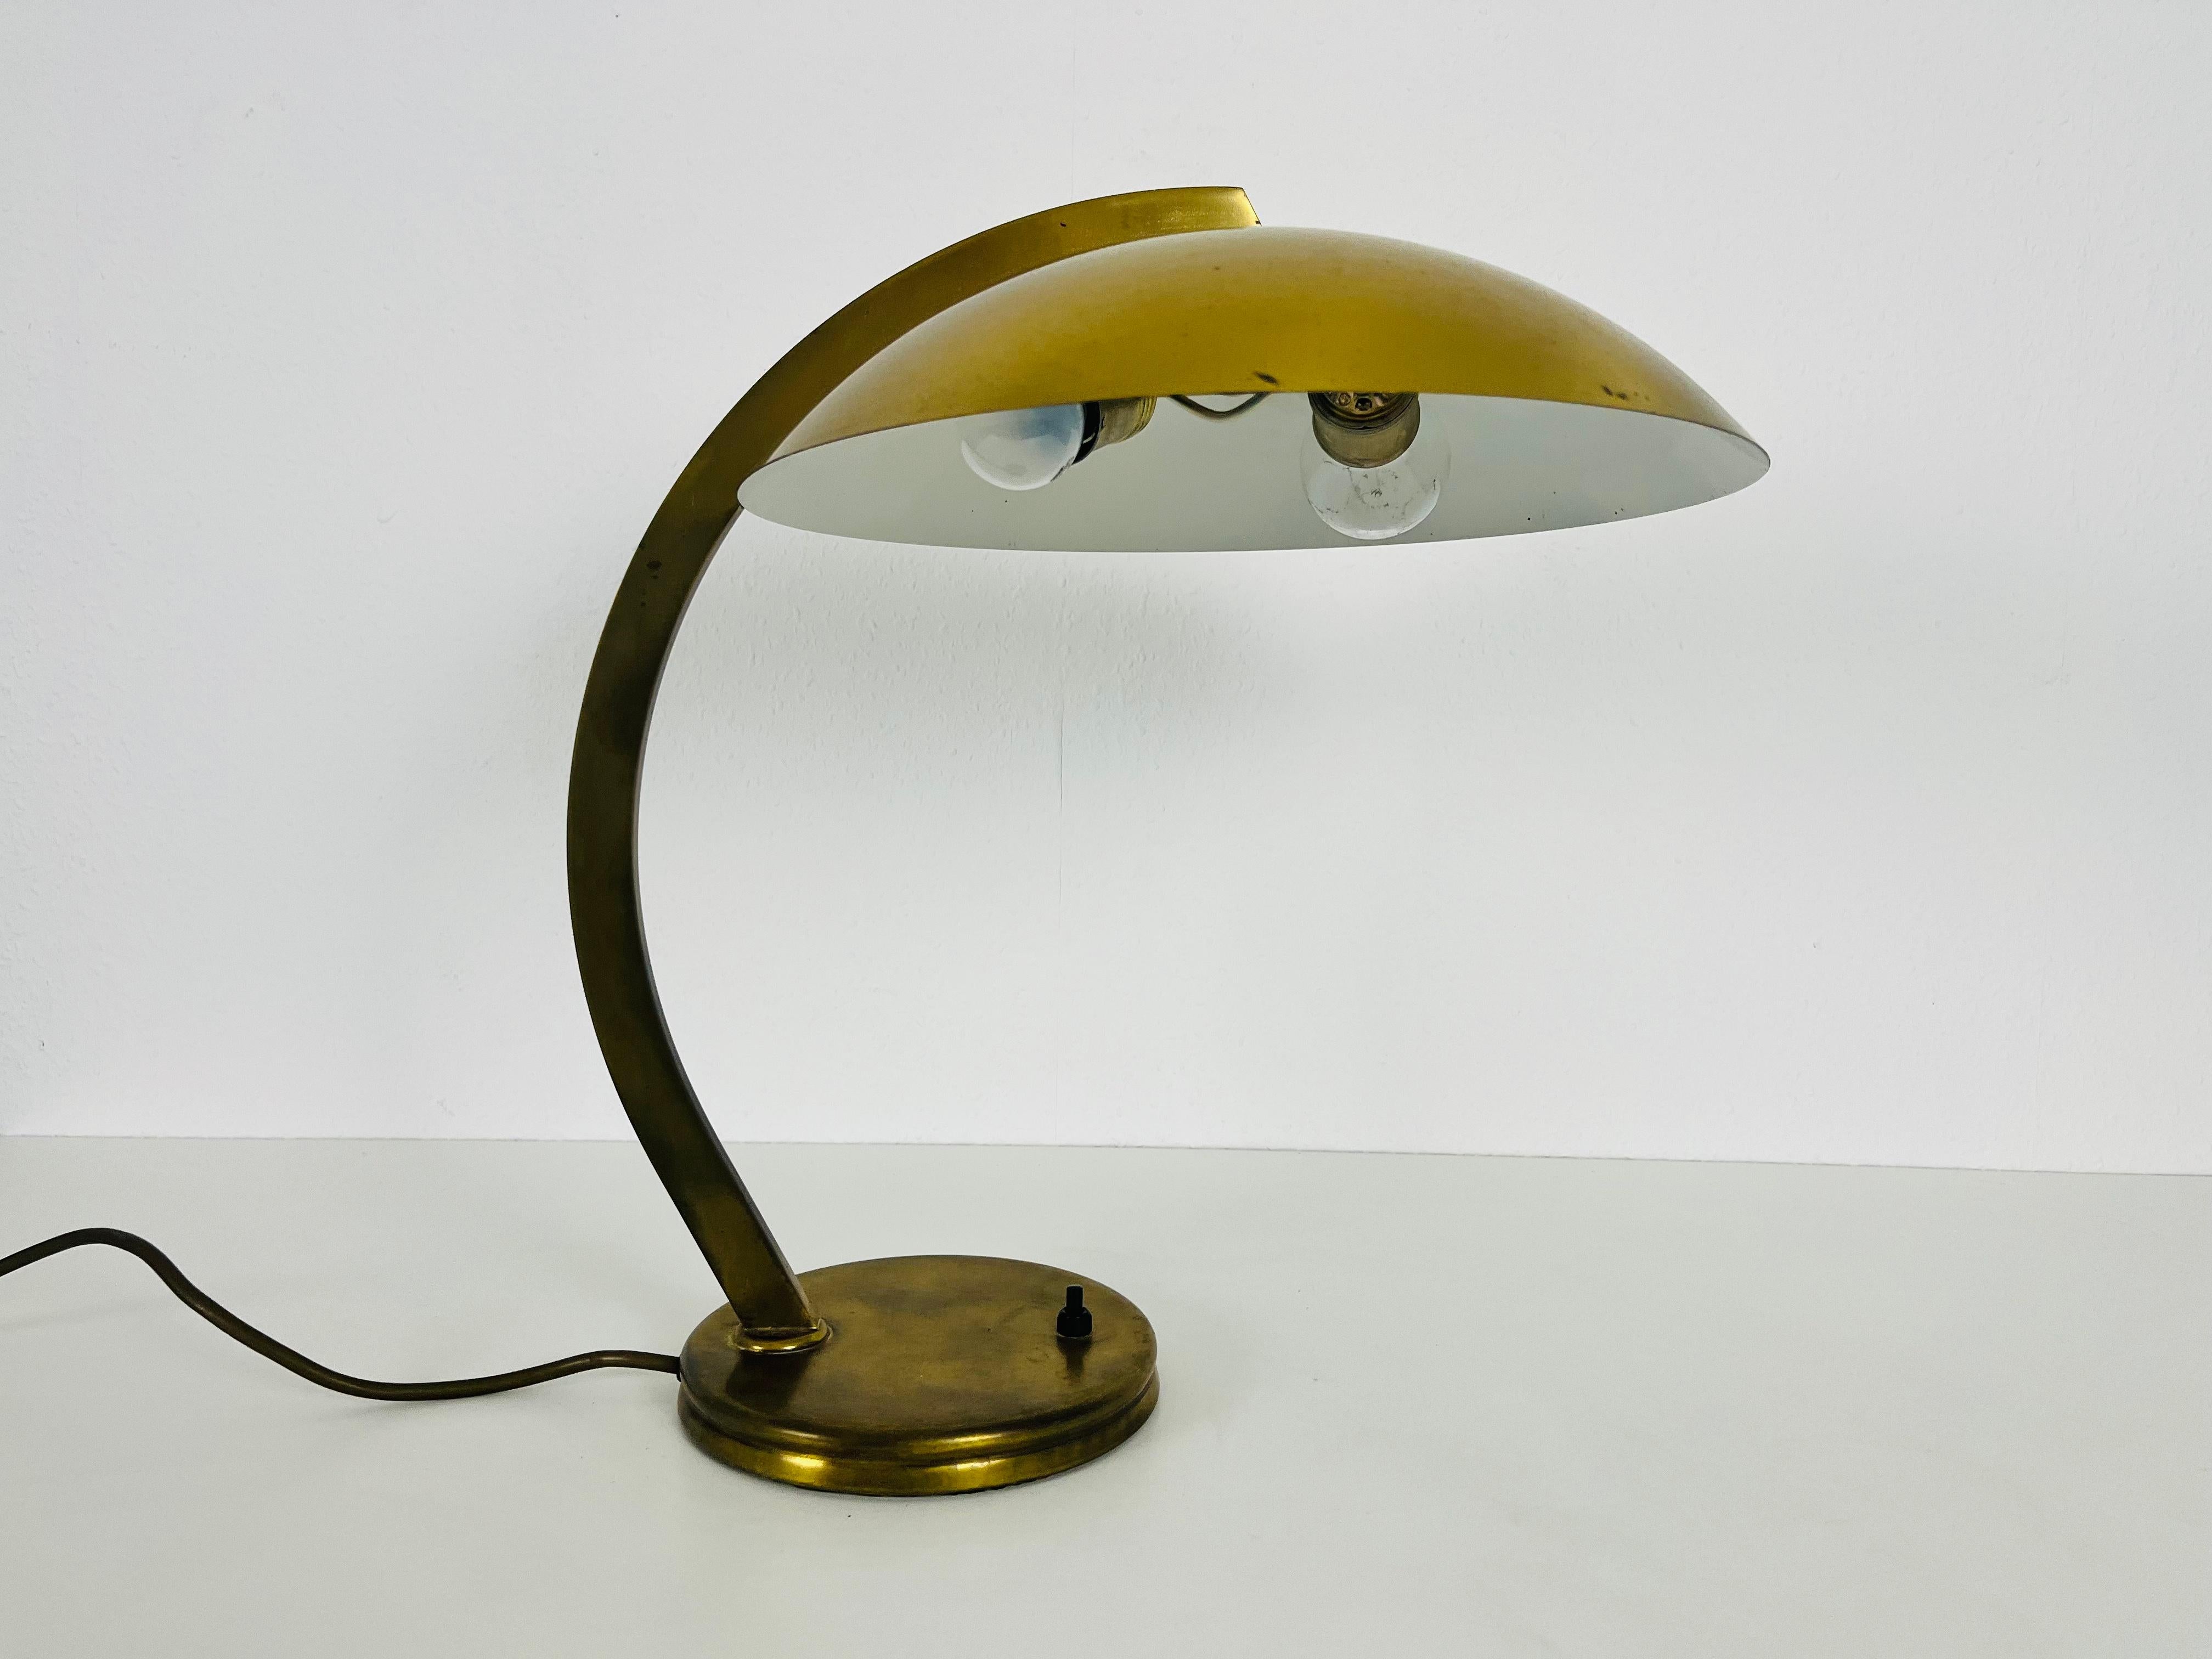 Hillebrand Midcentury Full Brass Table Lamp, 1960s, Germany In Good Condition For Sale In Hagenbach, DE